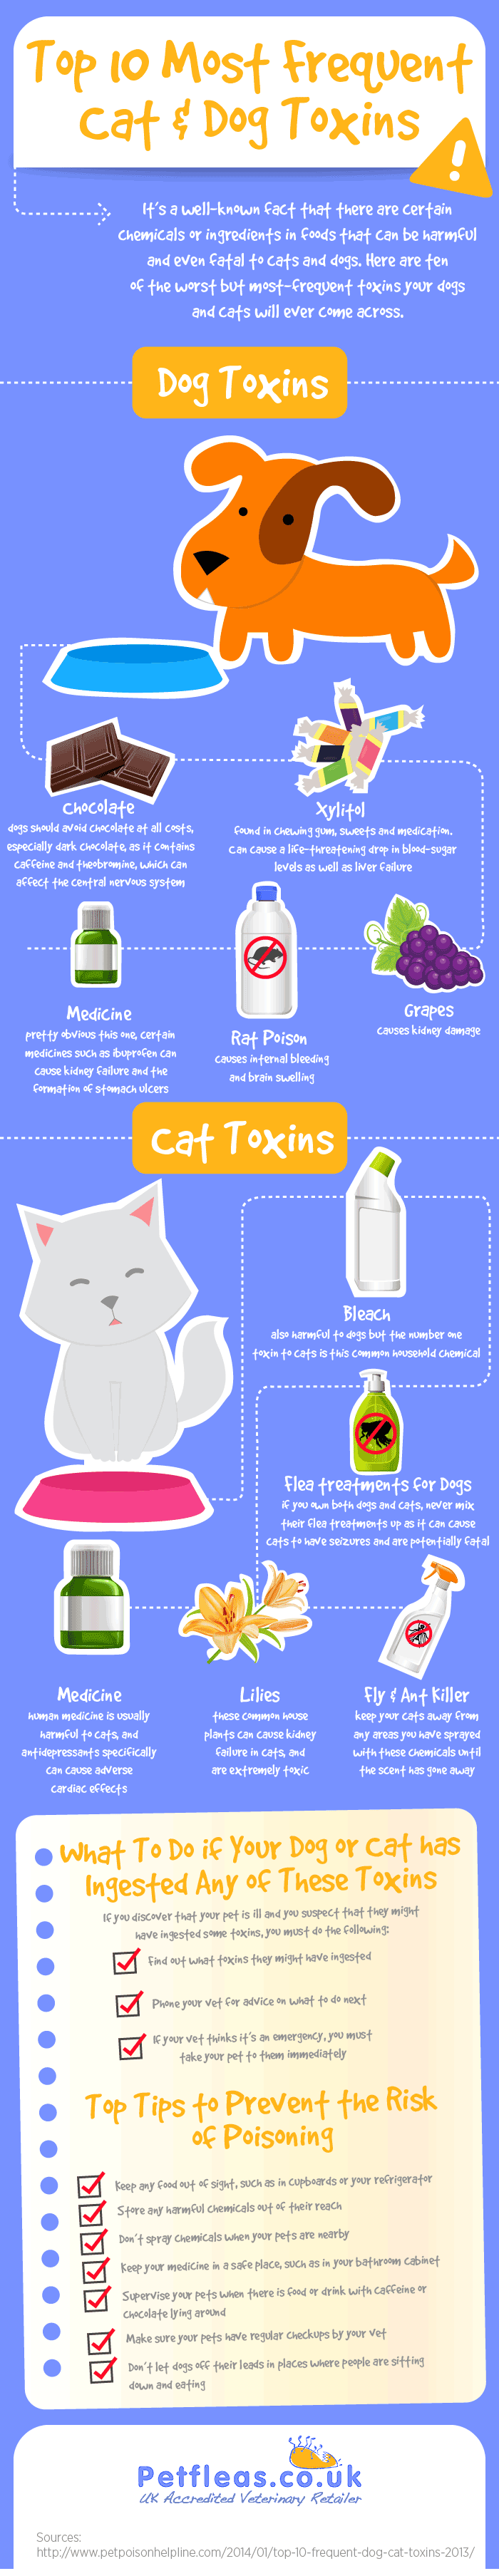 Top 10 Most Frequent Cat and Dog Toxins